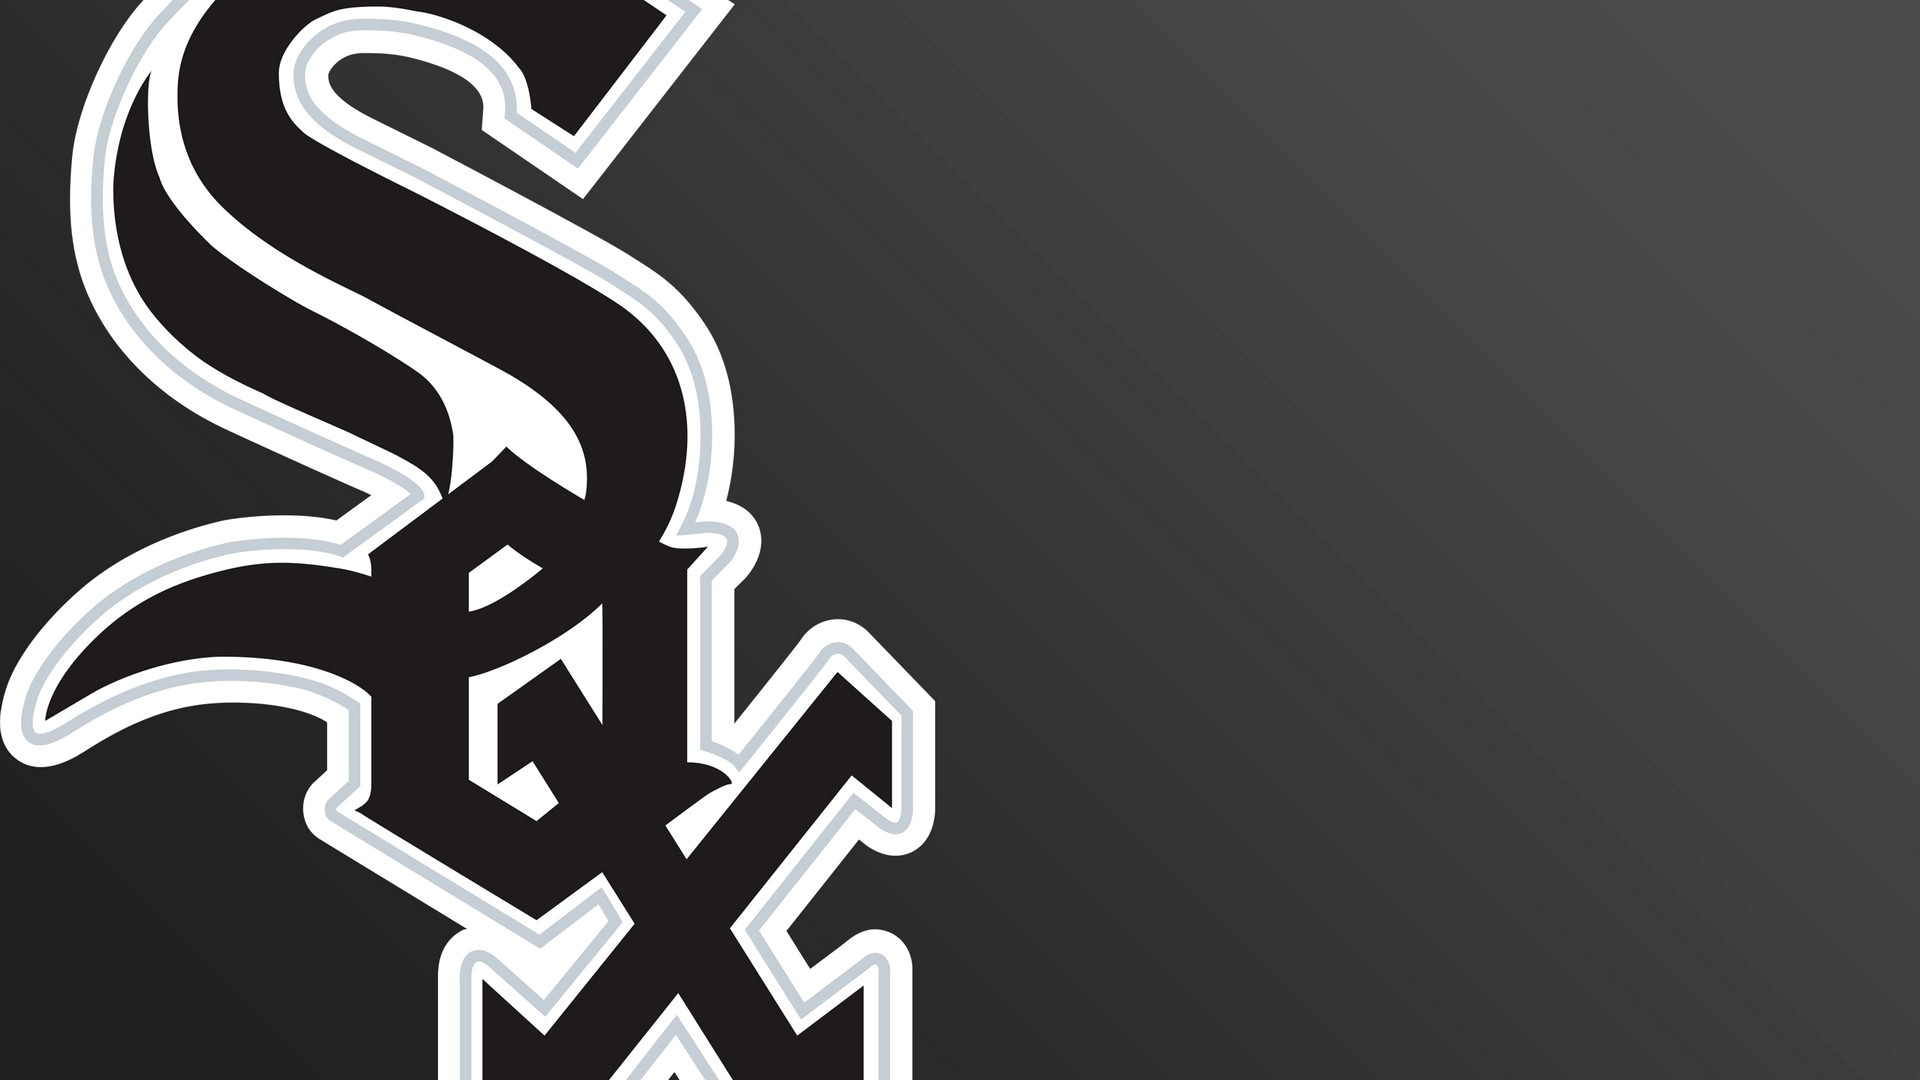 Chicago White Sox HD Wallpapers With high-resolution 1920X1080 pixel. You can use this wallpaper for Mac Desktop Wallpaper, Laptop Screensavers, Android Wallpapers, Tablet or iPhone Home Screen and another mobile phone device